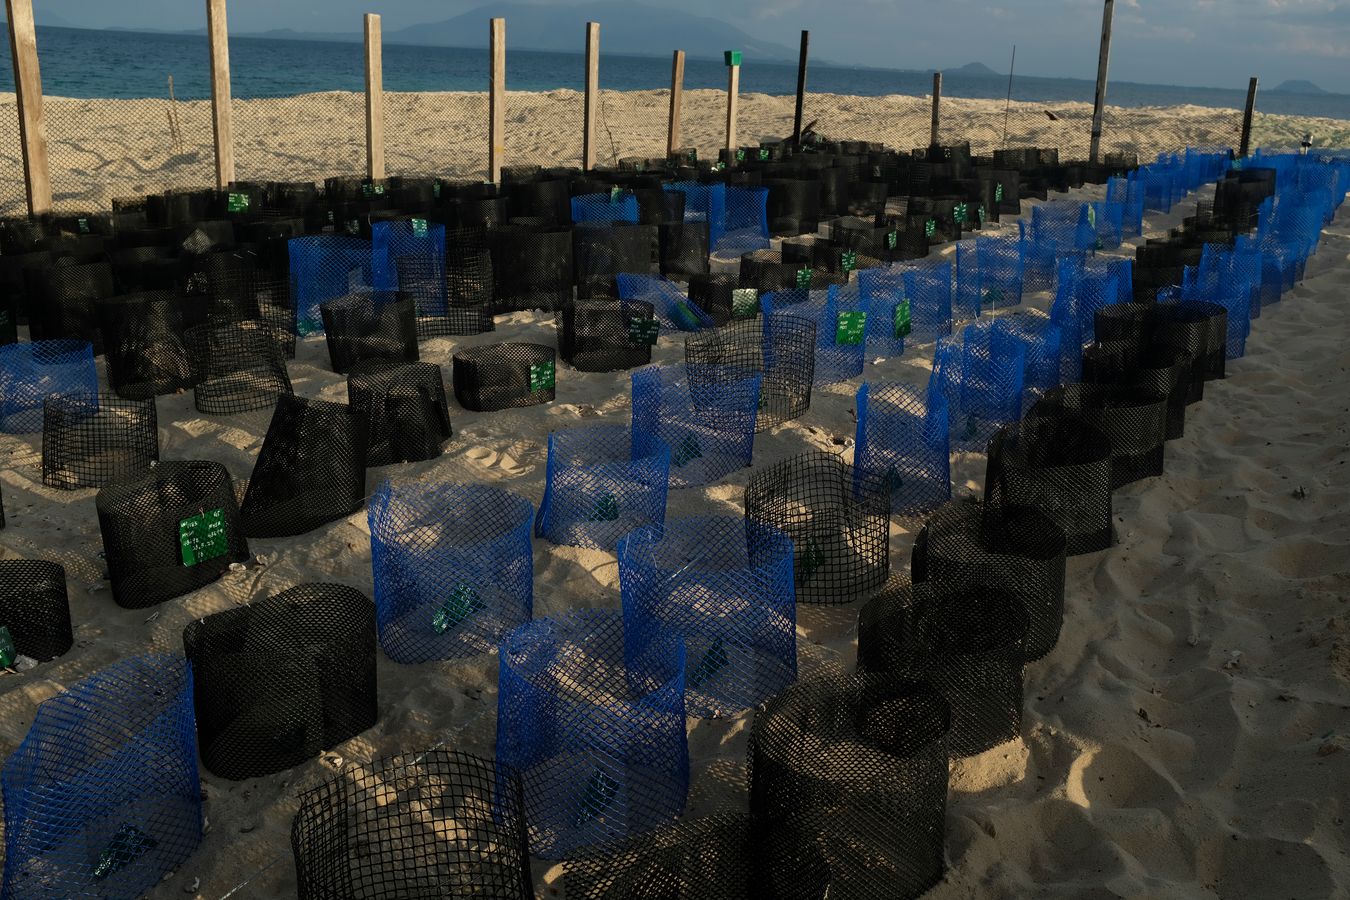 A view of the individual nests at the sea turtle hatchery at sunset.